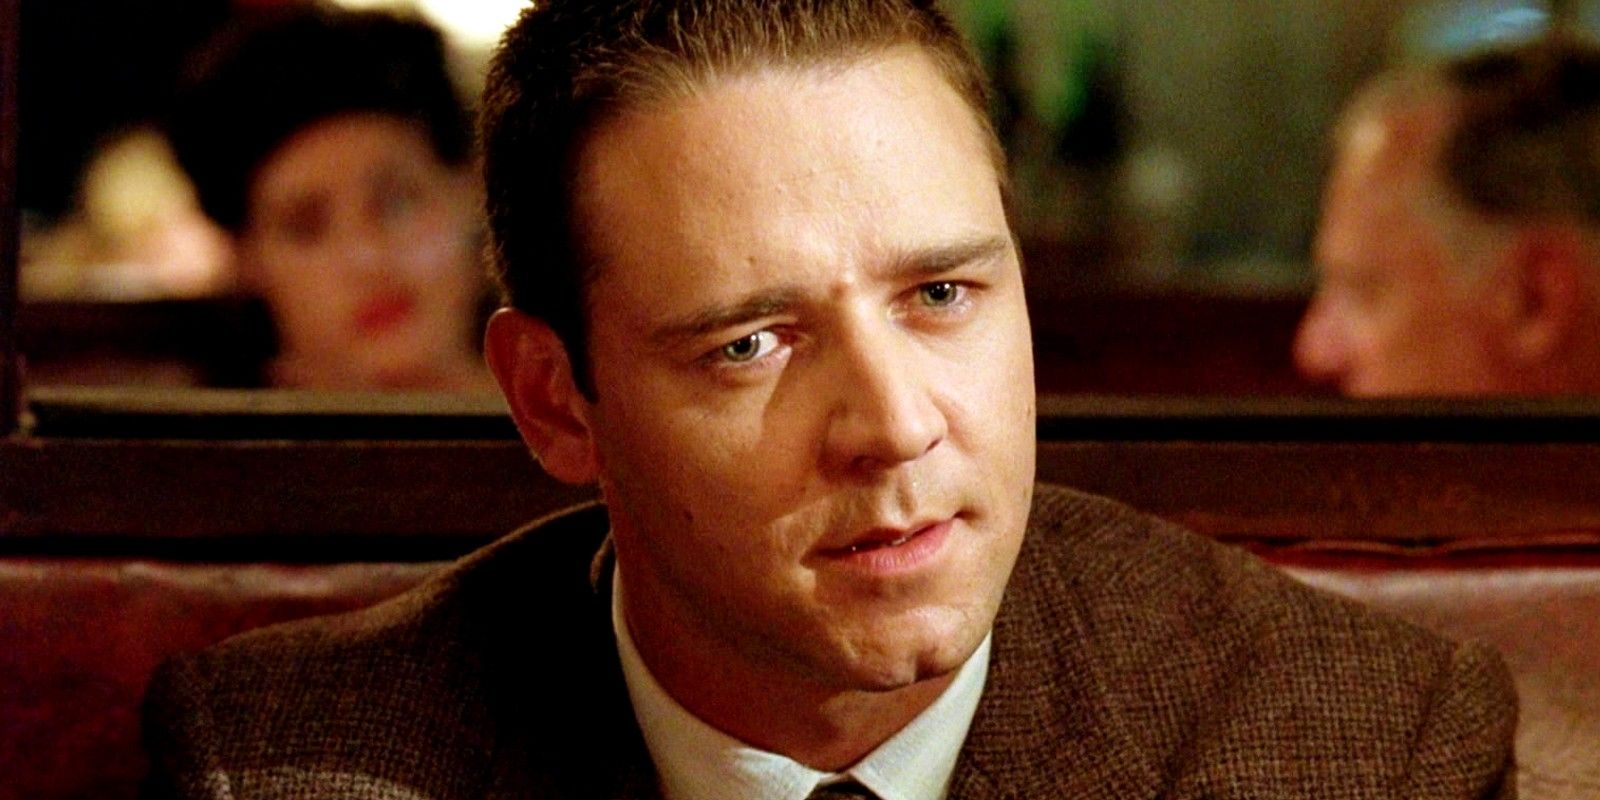 Russell Crowe talking to someone while at a restaurant in LA Confidential